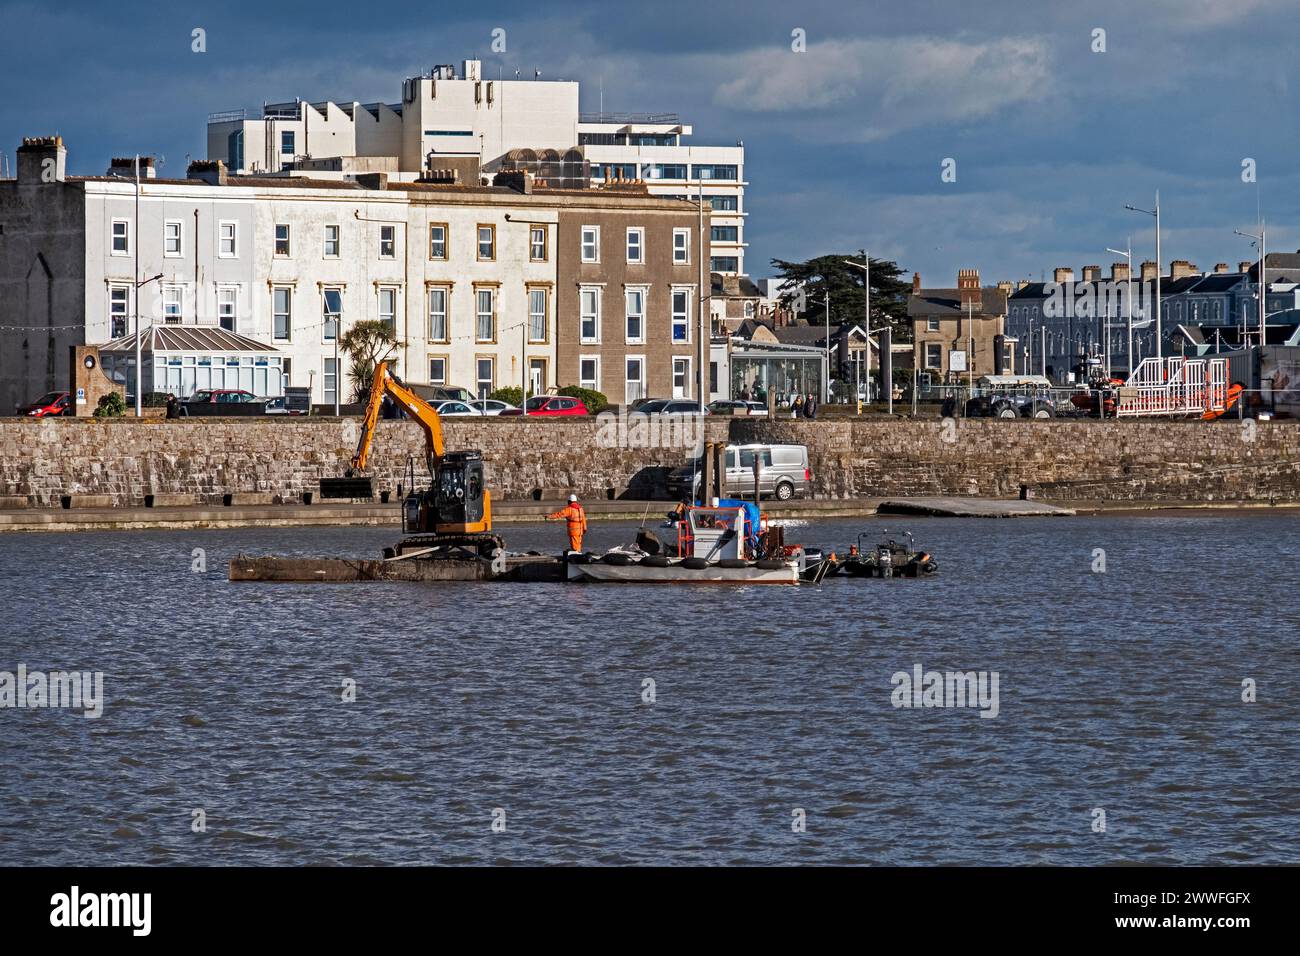 Dredging to remove excess mud from the Marine Lake in Weston-super-Mare, UK on 26 February 2024. Weston-super-Mare is situated on the Bristol Channel, which has one of the highest tidal ranges in the world, and regular dredging is required to ensure that the Marine Lake remains usable for swimming. Stock Photo